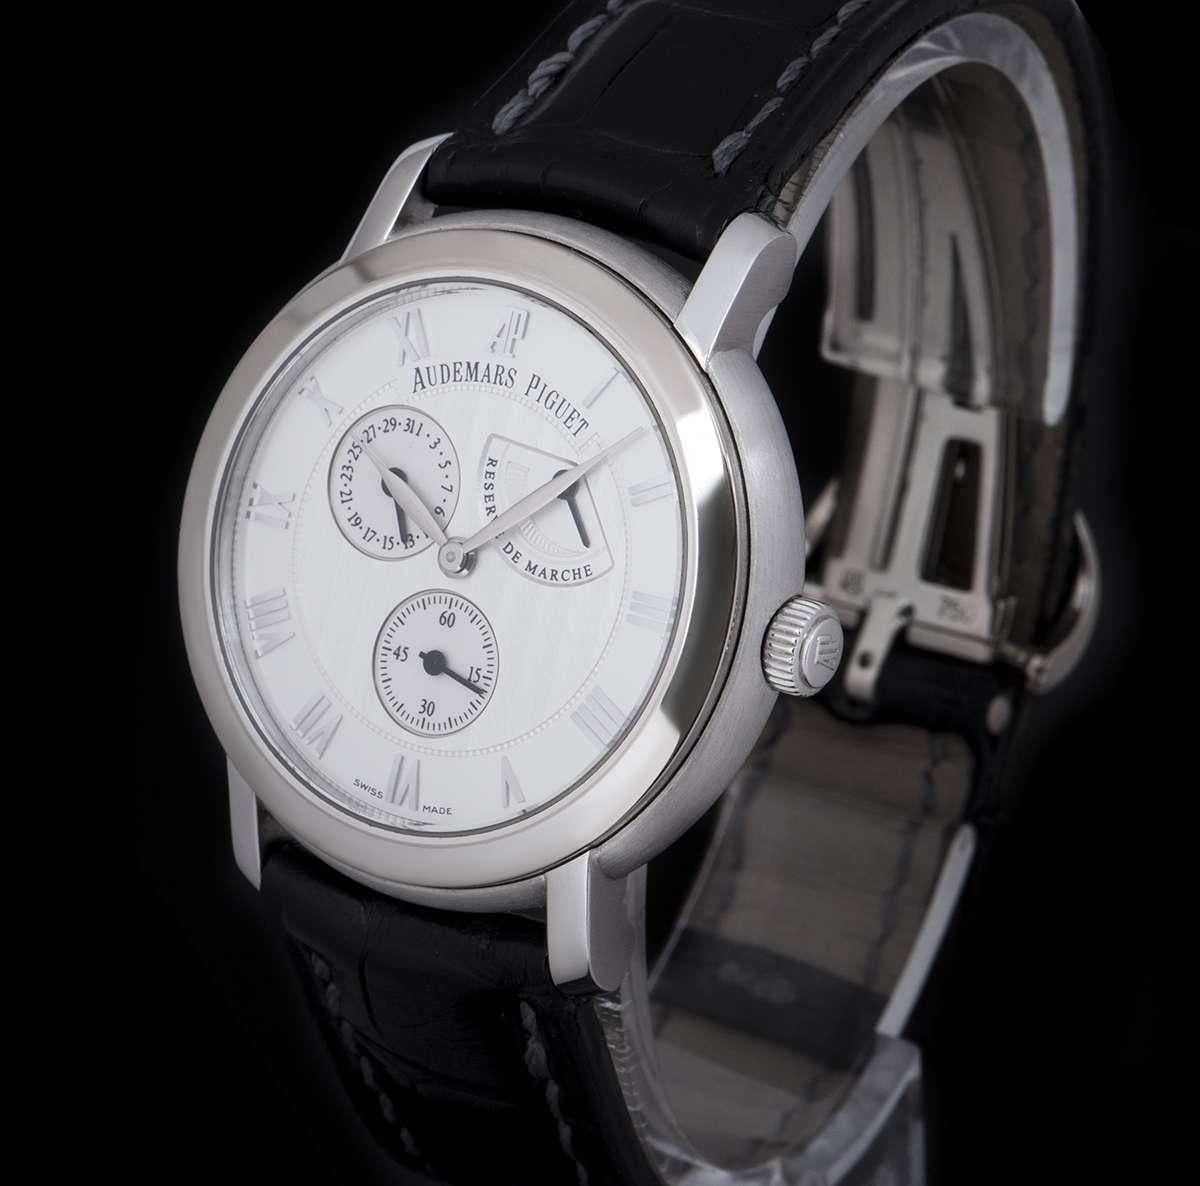 An 18k White Gold Jules Audemars Gents Wristwatch, silver dial with applied roman numerals, power reserve indicator between 1 and 2 0'clock, small seconds at 6 0'clock, date at 10 0'clock, a fixed 18k white gold bezel, an original black leather